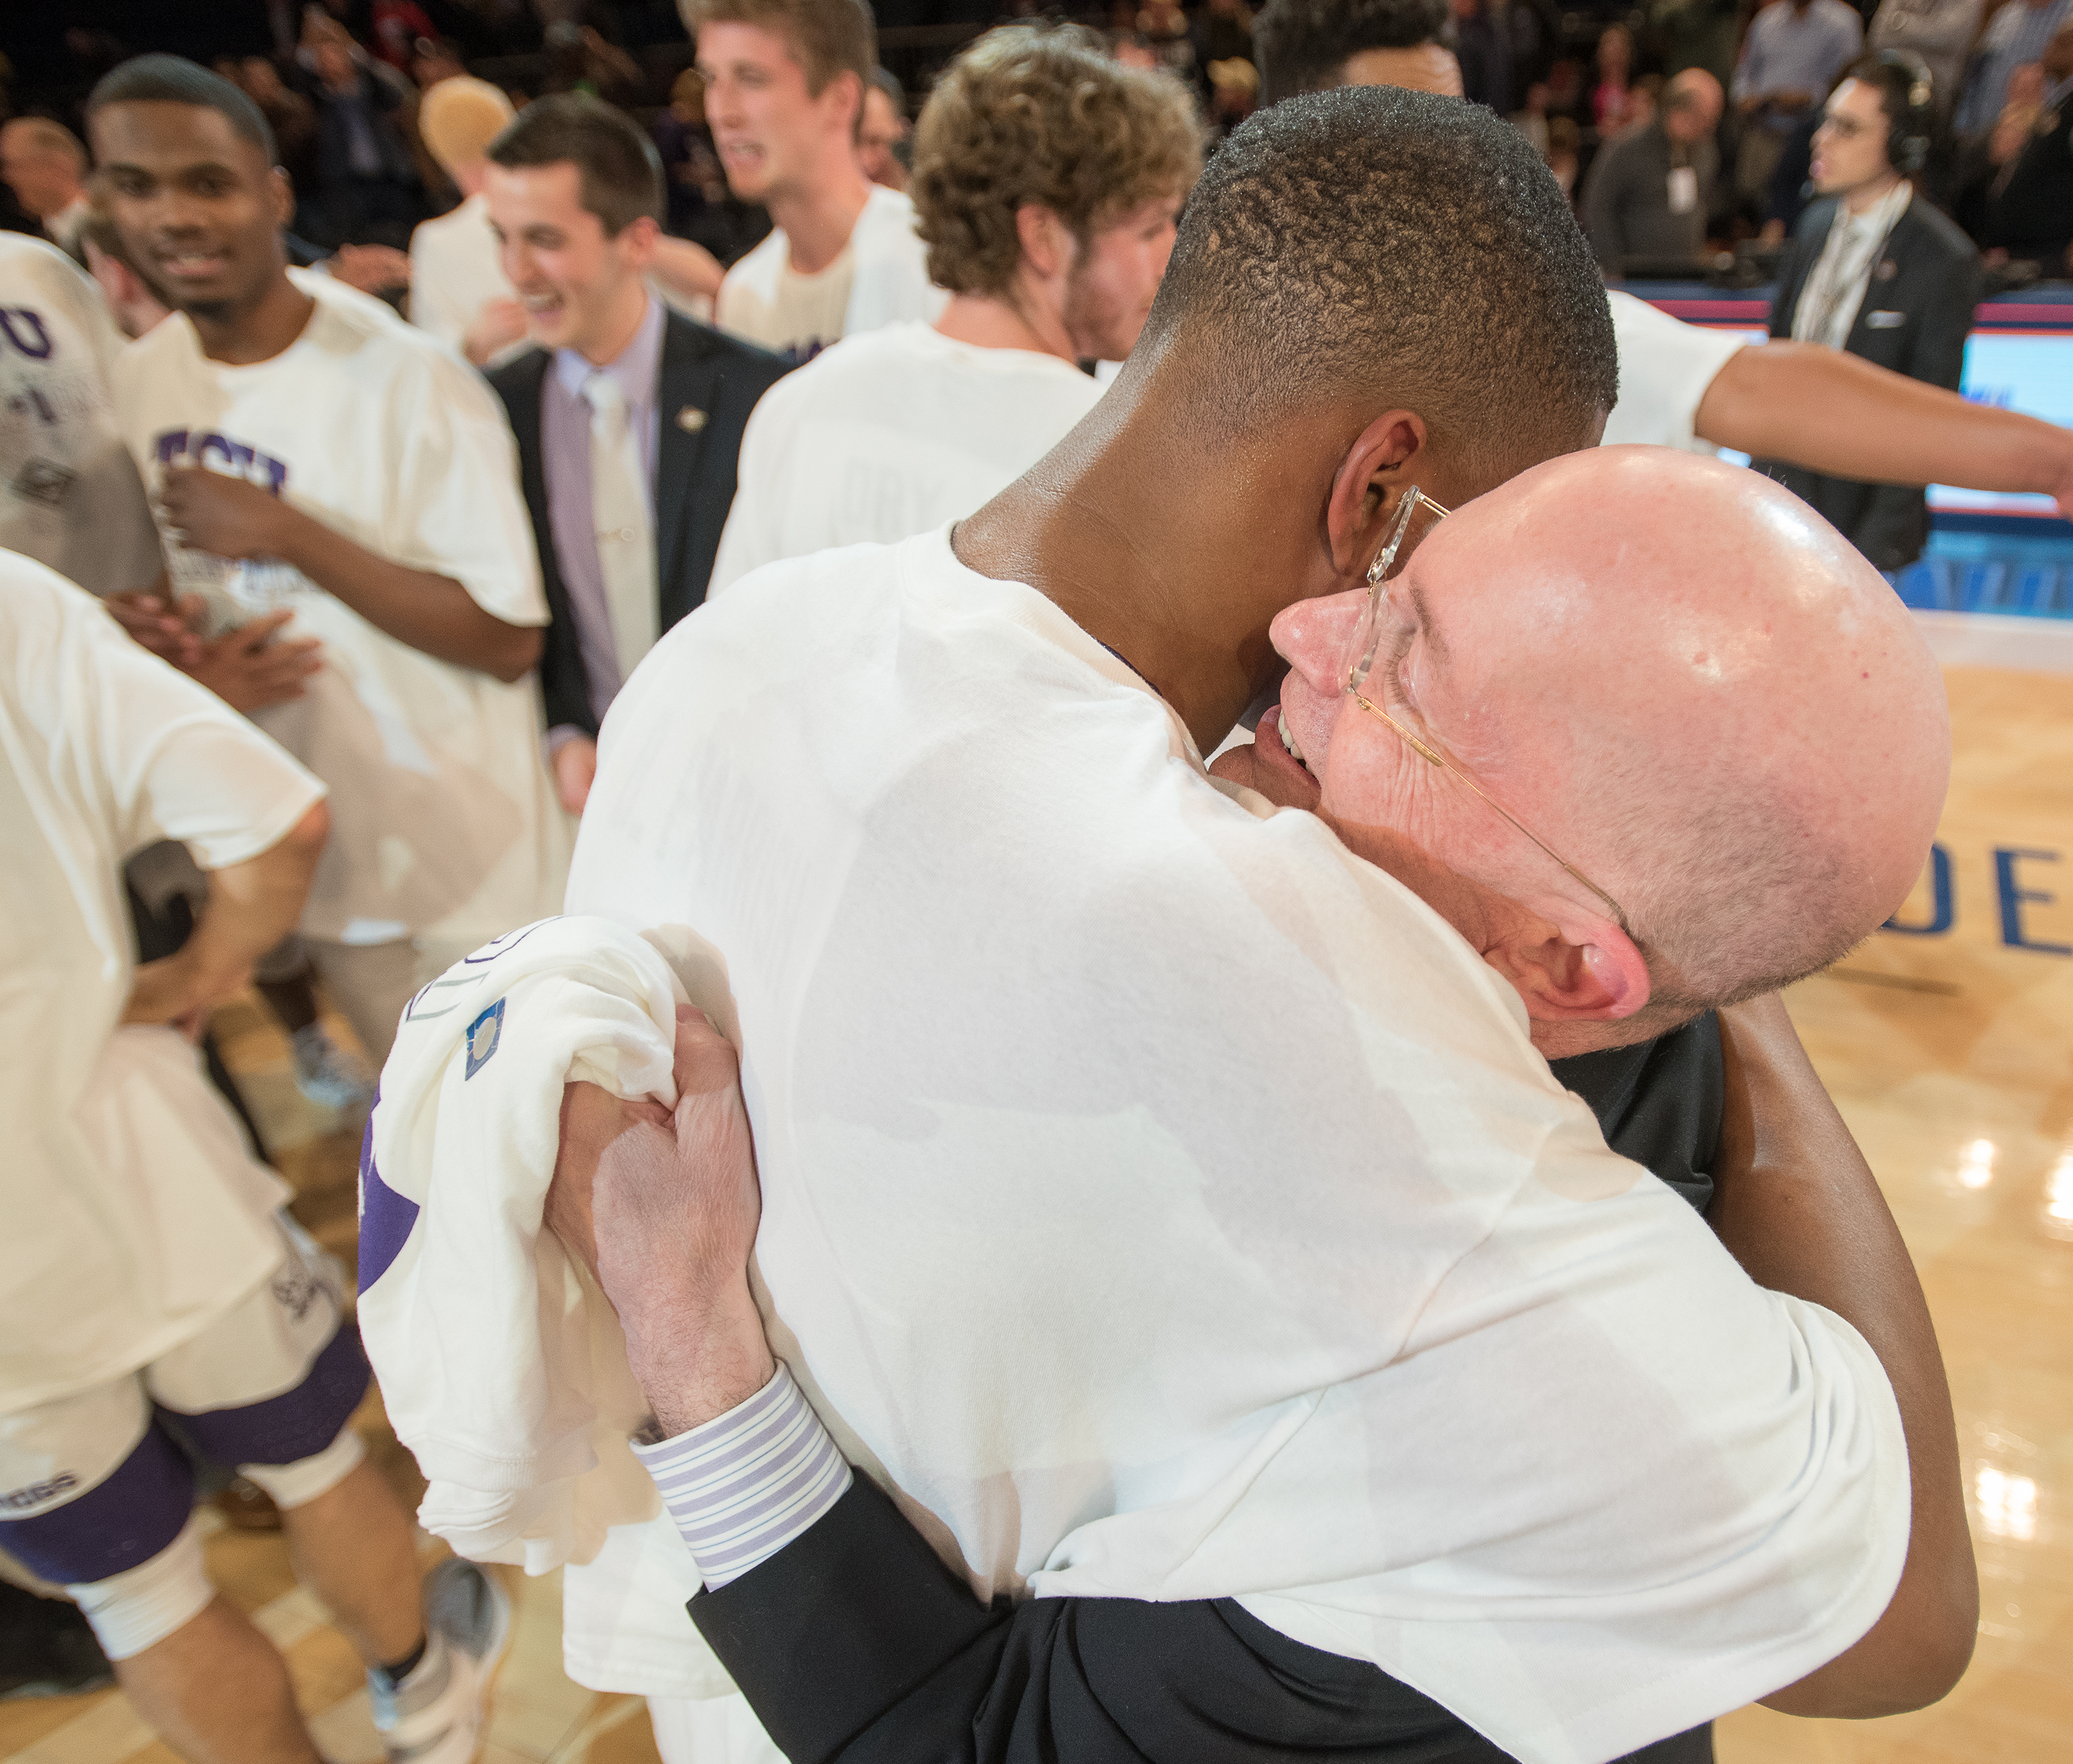 Post-game, TCU Chancellor Victor J. Boschini, Jr. hugs a TCU basketball player in celebration of the team's NIT victory.